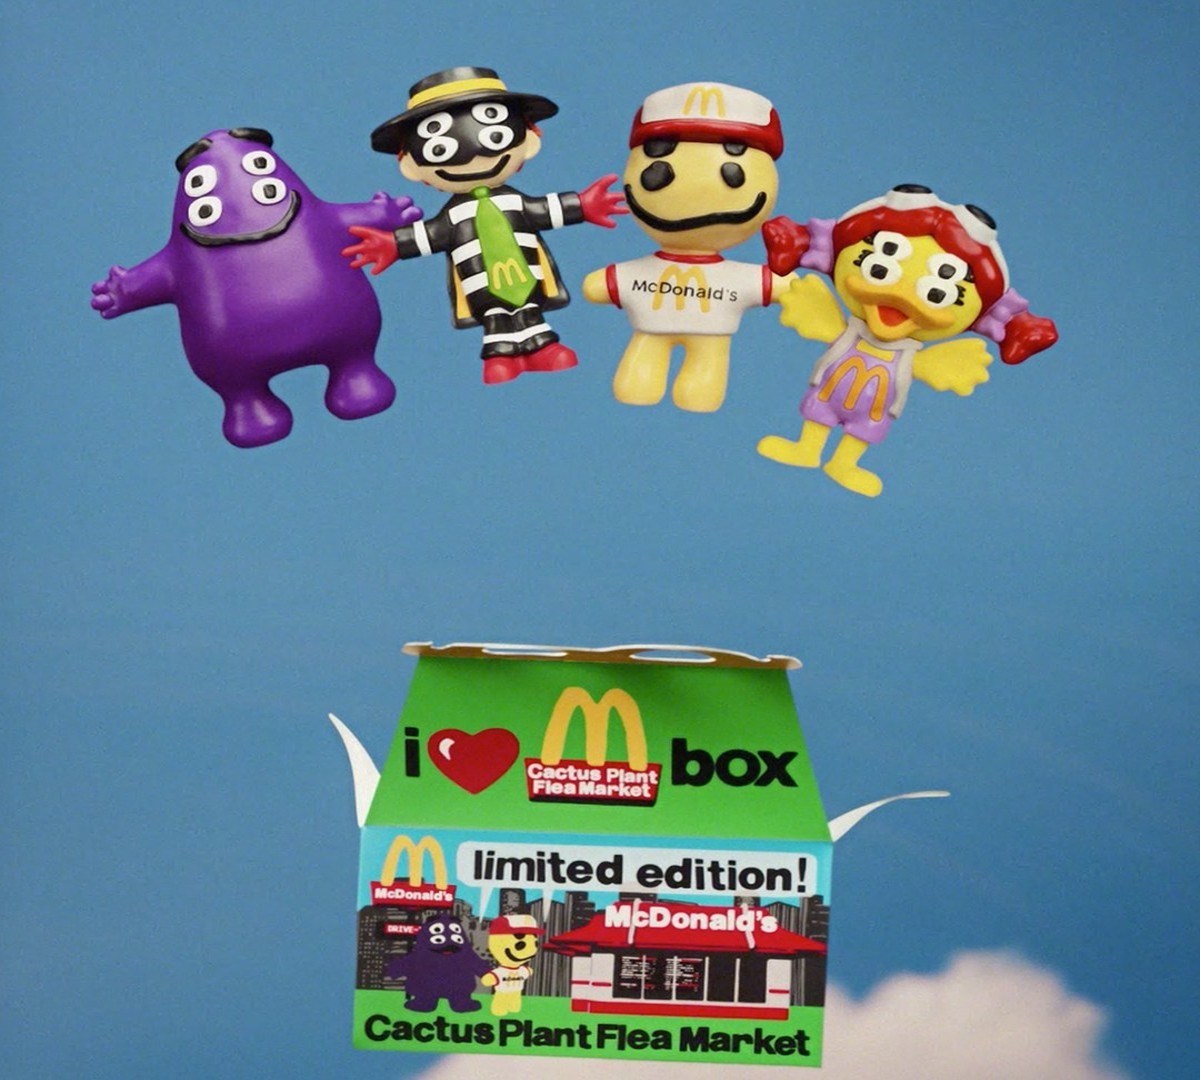 McDonald’s workers ask not to order Happy Meal for adults: why